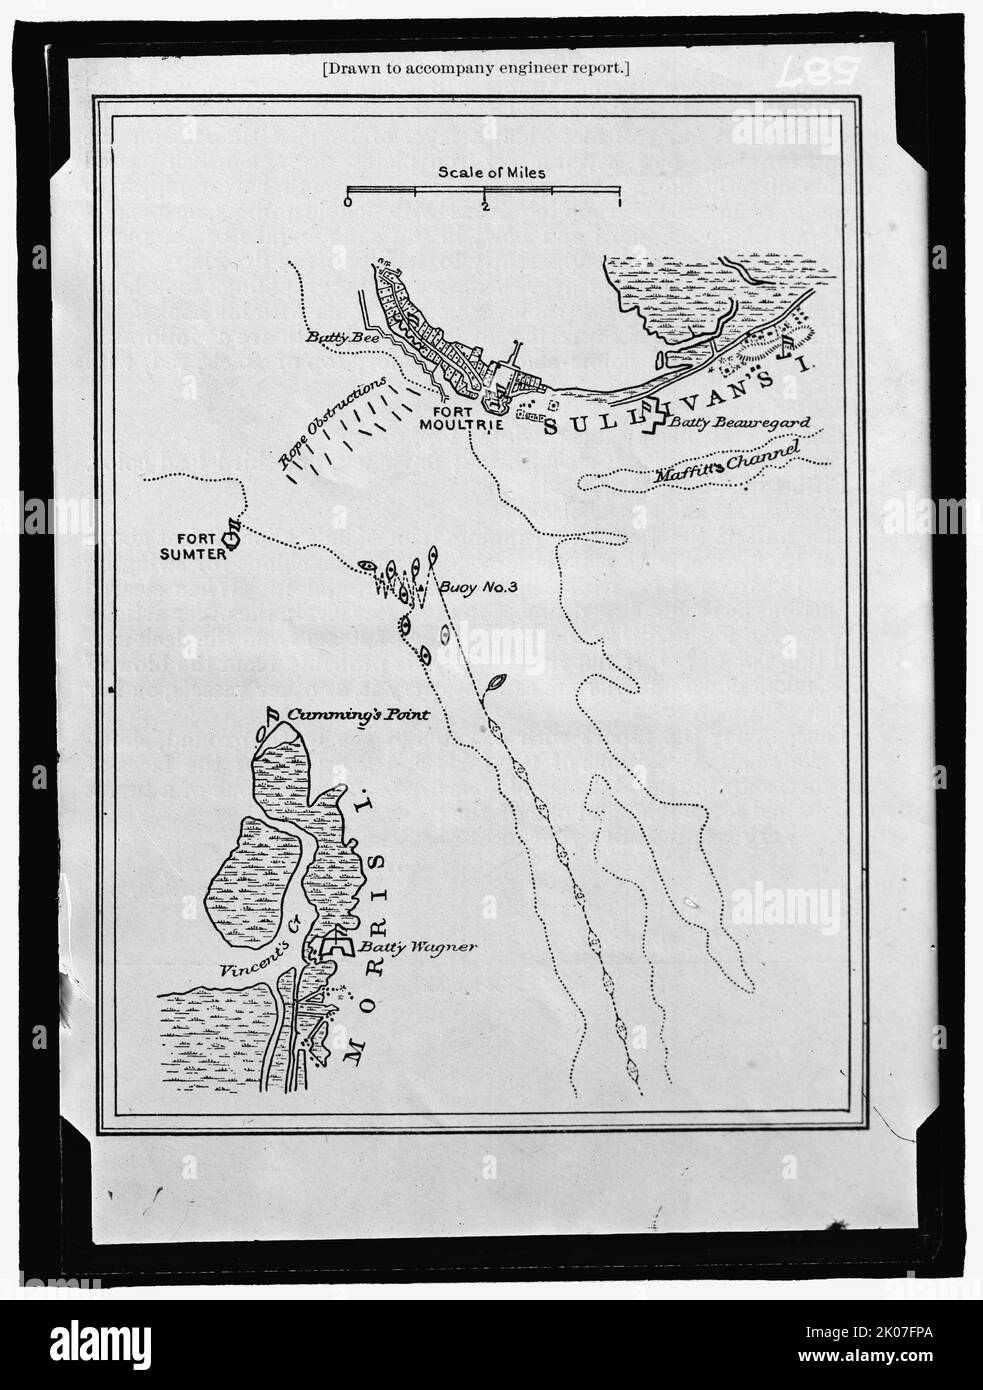 Map showing Fort Sumter and Fort Moultrie, between 1909 and 1914. 'Drawn to accompany engineer report'. Battle site, Charleston Harbour, South Carolina: Battery Bee, rope obstructions, Sullivan's Island, Maffitt's Channel, buoys, Cumming's Point, Vincent's Creek, Morris Island, Battery Wagner. Stock Photo